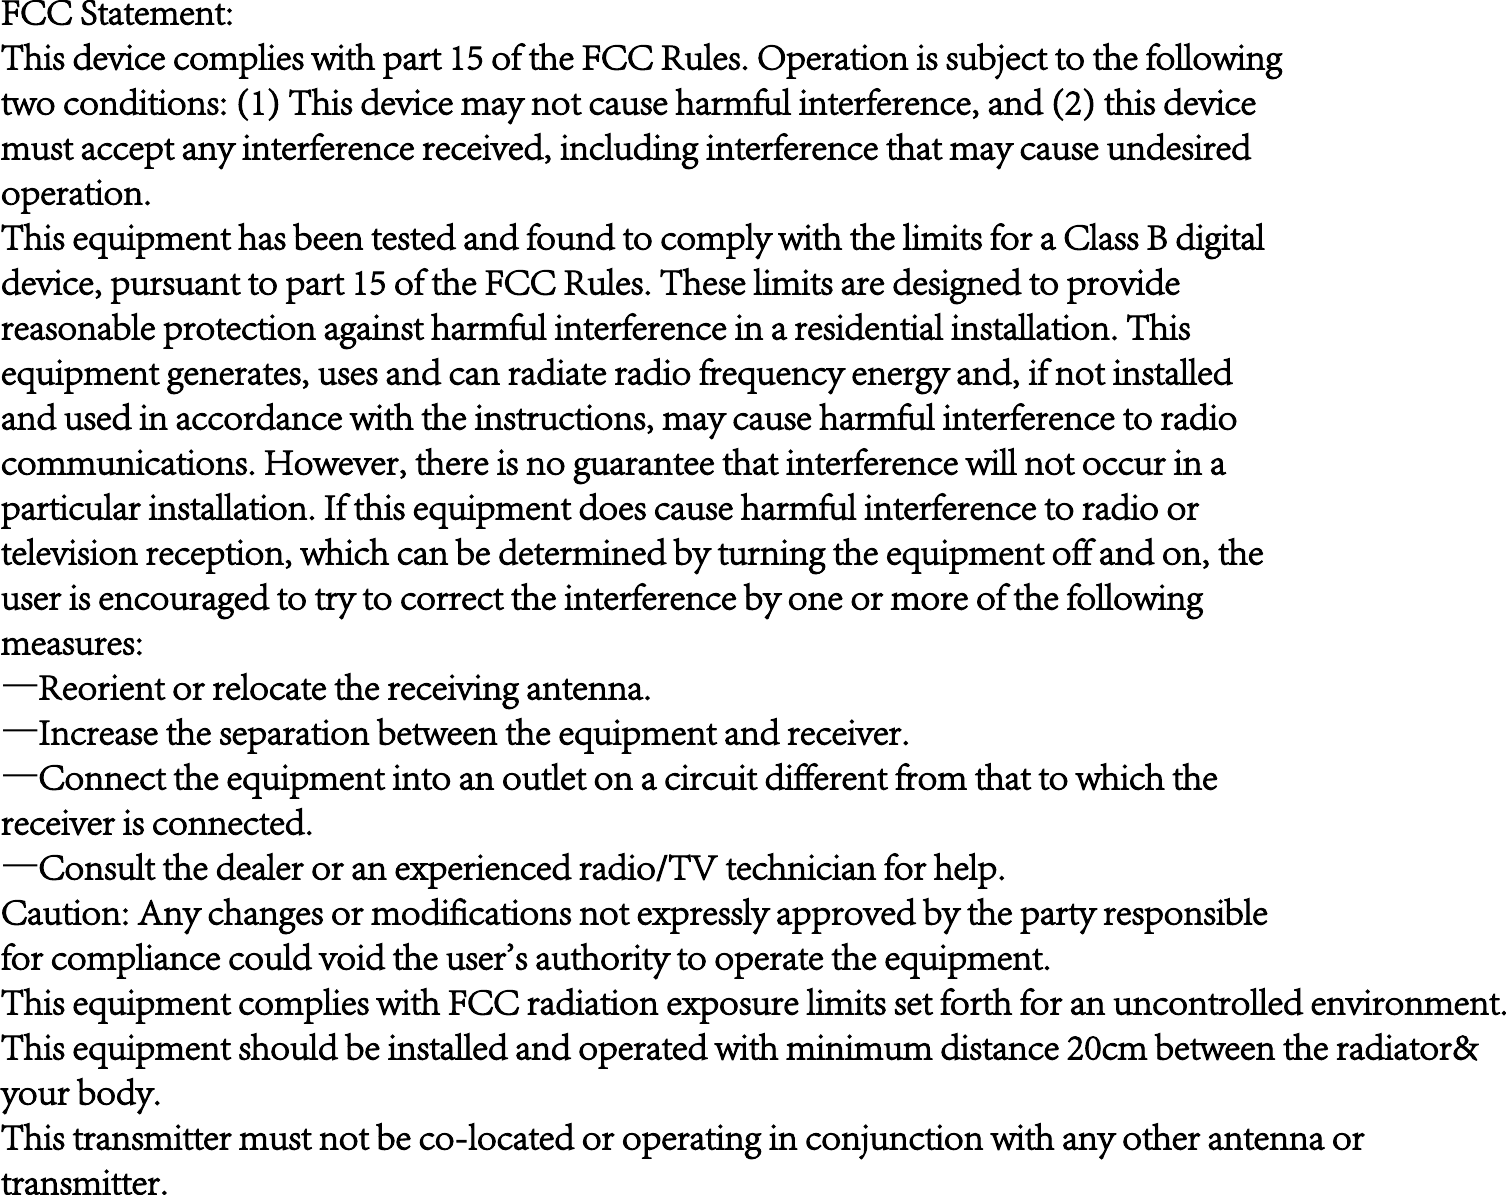 FCC Statement:This device complies with part 15 of the FCC Rules. Operation is subject to the followingtwo conditions: (1) This device may not cause harmful interference, and (2) this devicemust accept any interference received, including interference that may cause undesiredoperation.This equipment has been tested and found to comply with the limits for a Class B digitaldevice, pursuant to part 15 of the FCC Rules. These limits are designed to providereasonable protection against harmful interference in a residential installation. Thisequipment generates, uses and can radiate radio frequency energy and, if not installedand used in accordance with the instructions, may cause harmful interference to radiocommunications. However, there is no guarantee that interference will not occur in aparticular installation. If this equipment does cause harmful interference to radio ortelevision reception, which can be determined by turning the equipment off and on, theuser is encouraged to try to correct the interference by one or more of the followingmeasures:—Reorient or relocate the receiving antenna.—Increase the separation between the equipment and receiver.—Connect the equipment into an outlet on a circuit different from that to which thereceiver is connected.—Consult the dealer or an experienced radio/TV technician for help.Caution: Any changes or modifications not expressly approved by the party responsiblefor compliance could void the user&apos;s authority to operate the equipment.This equipment complies with FCC radiation exposure limits set forth for an uncontrolled environment.This equipment should be installed and operated with minimum distance 20cm between the radiator&amp;your body.This transmitter must not be co-located or operating in conjunction with any other antenna ortransmitter.